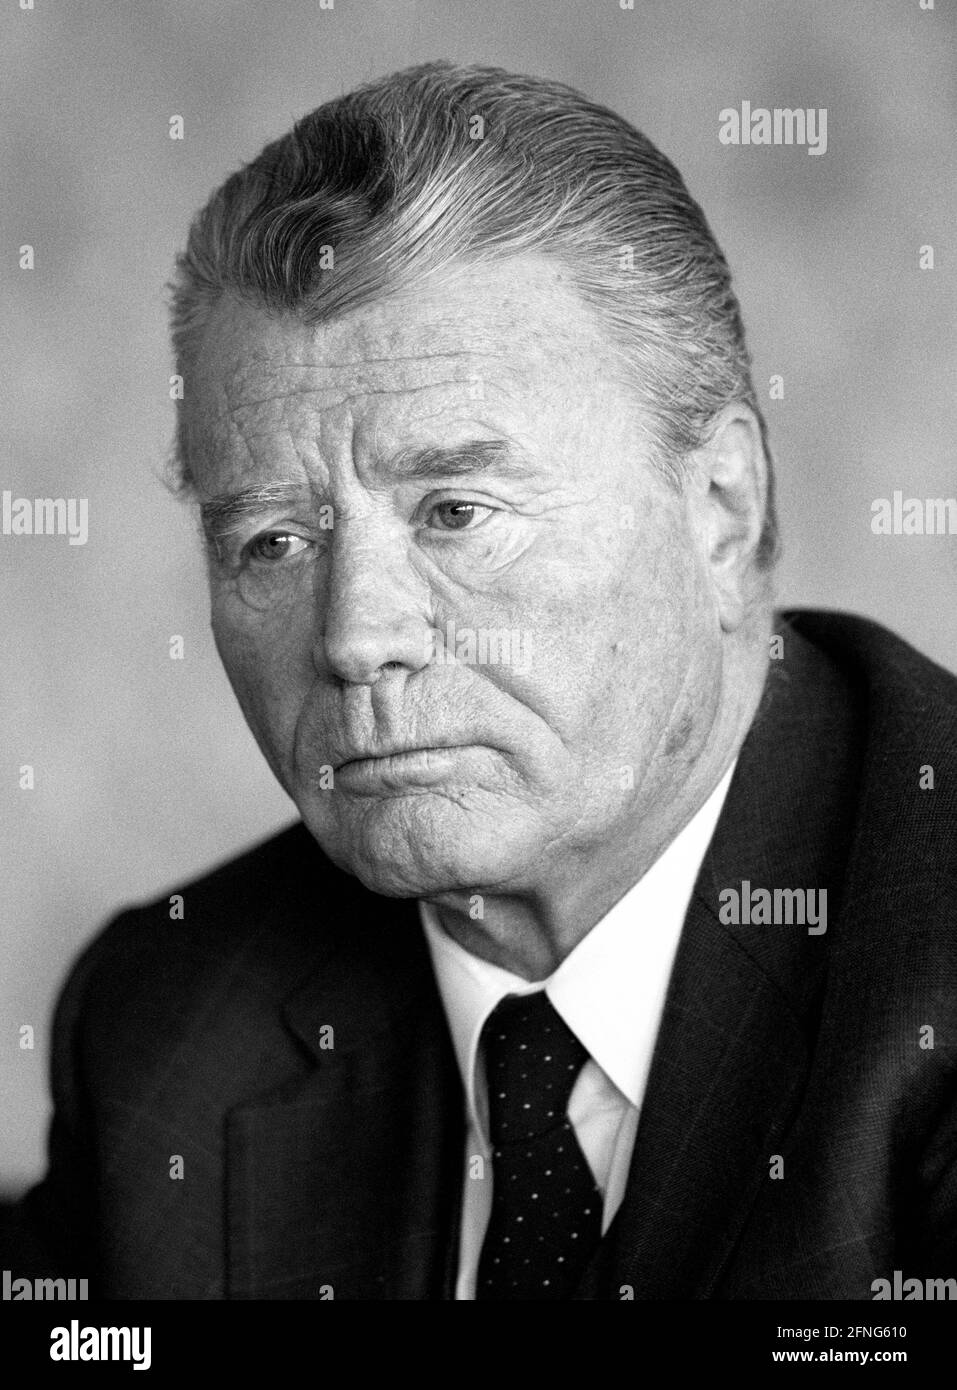 Walter SEIPP , Chairman of the Board of Managing Directors of Commerzbank AG , March 1989 [automated translation] Stock Photo